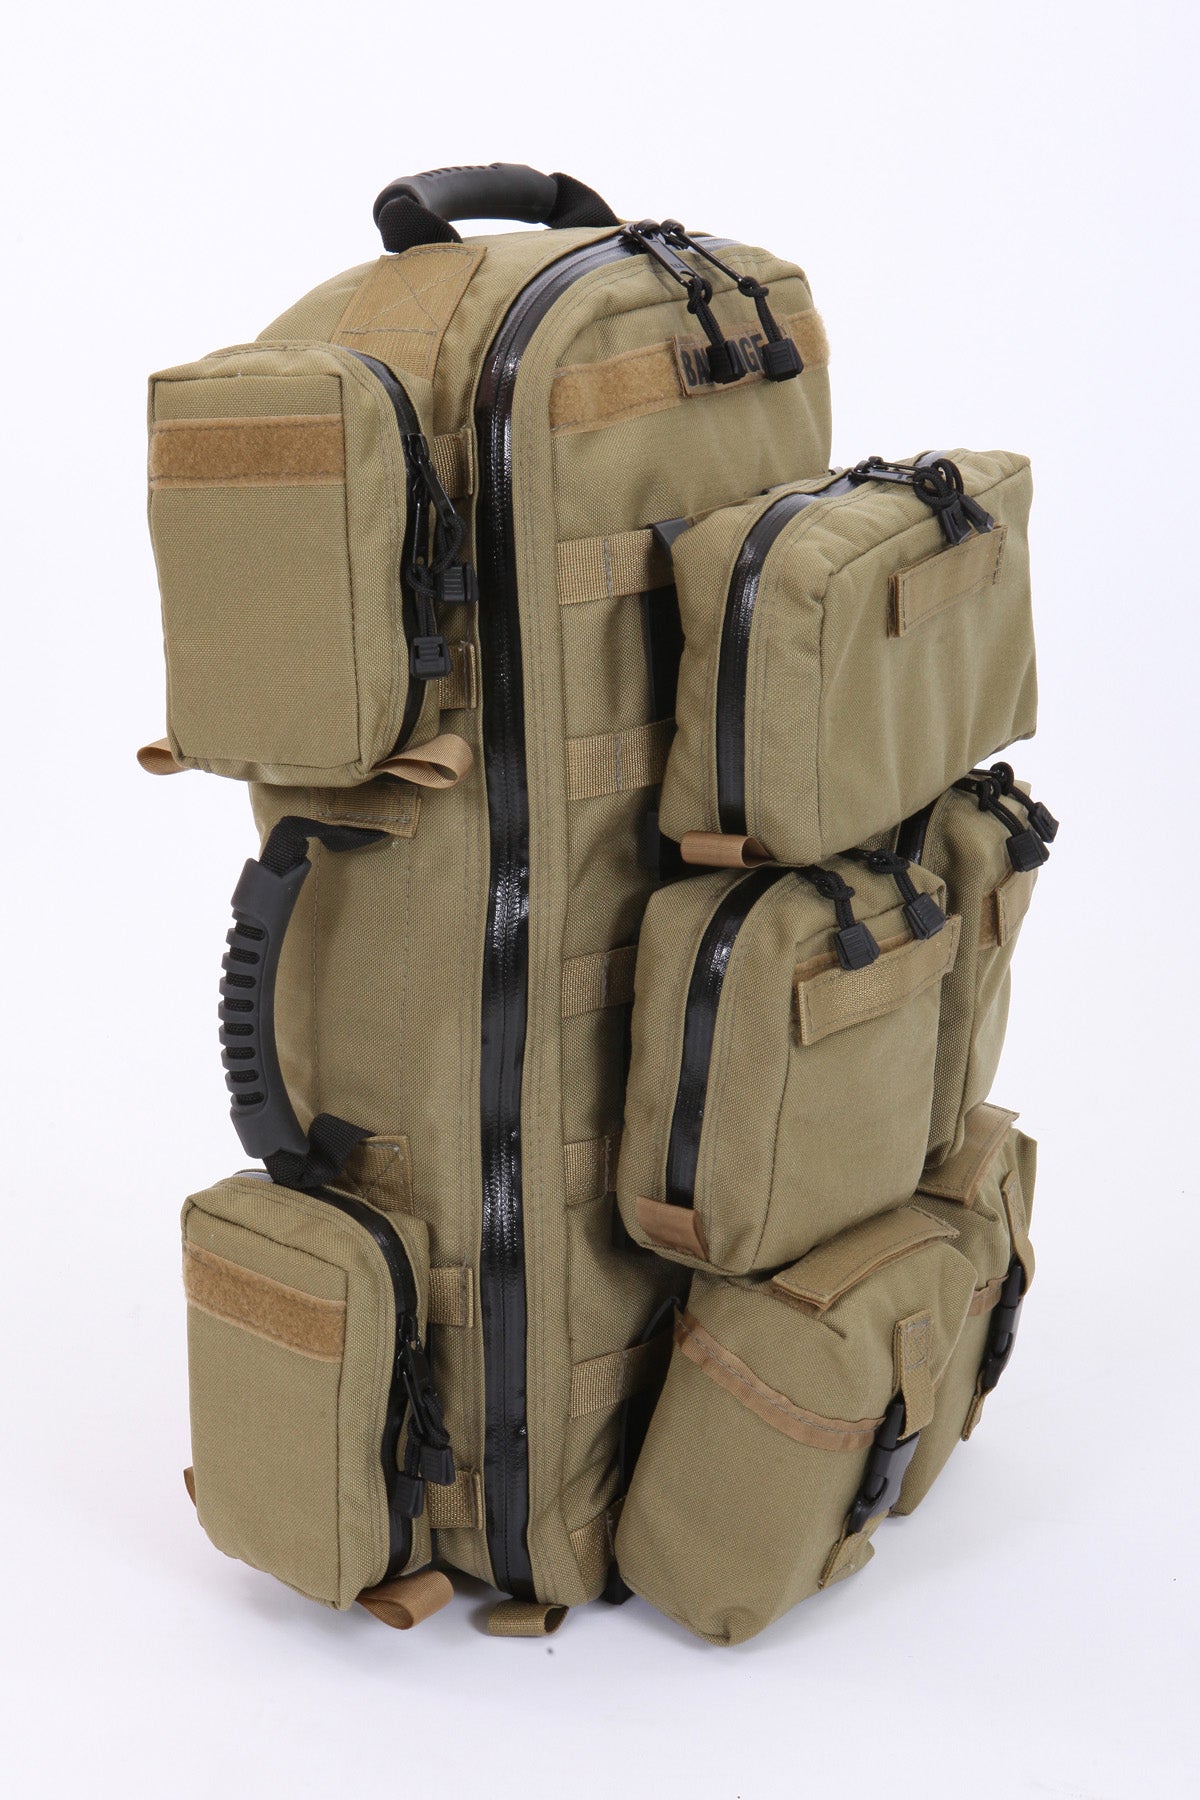 Premium Tactical Modular Medical Backpack w/ Molle, Dividers, Loops,  Pouches, Removable Velcro Pouches & Hydration Port—RED - Alexis Fire Store